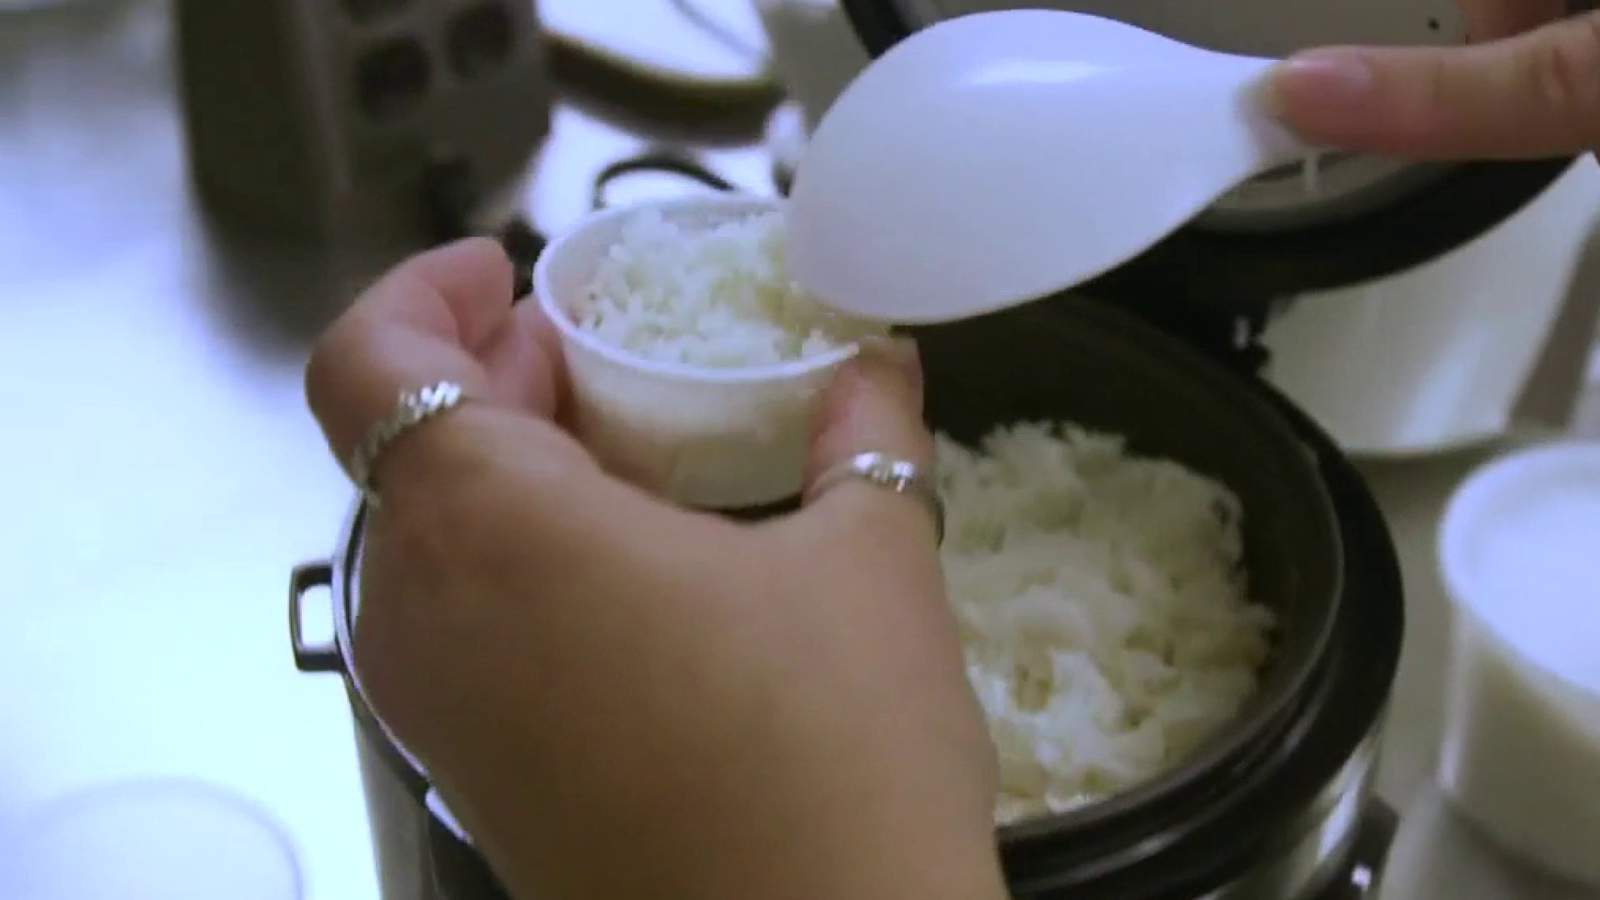 Trouble making great rice? Here are some rice cookers that can help